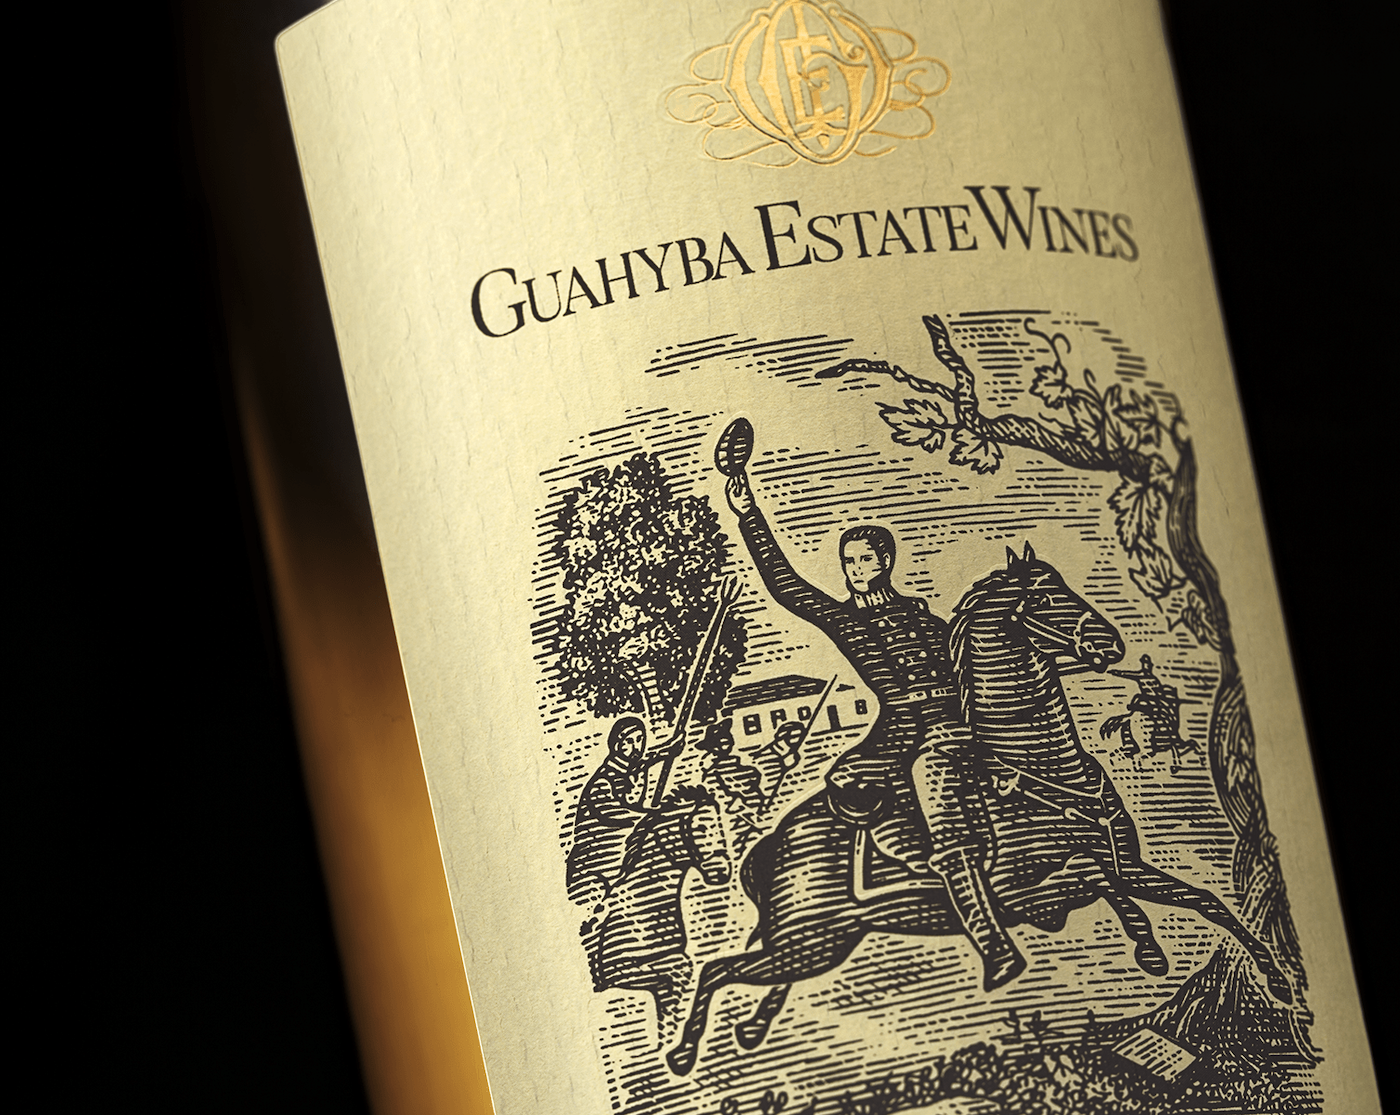 Guahyba Estates Wines Label Work Showcase Steven Noble, Directory of illustration